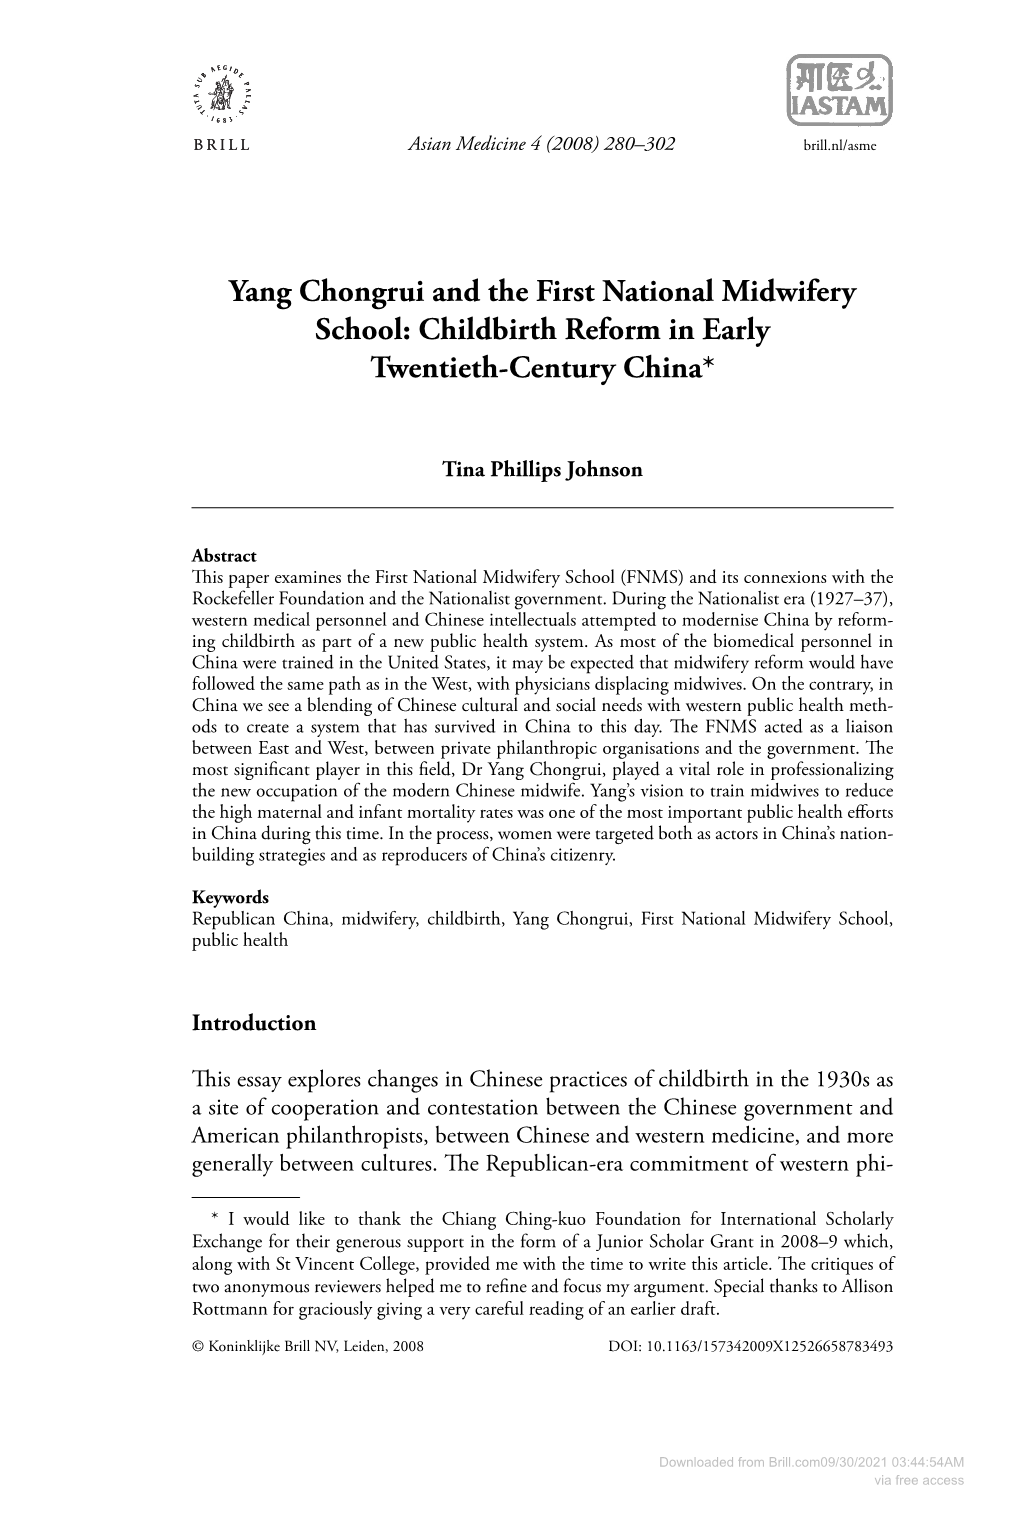 Yang Chongrui and the First National Midwifery School: Childbirth Reform in Early Twentieth-Century China*